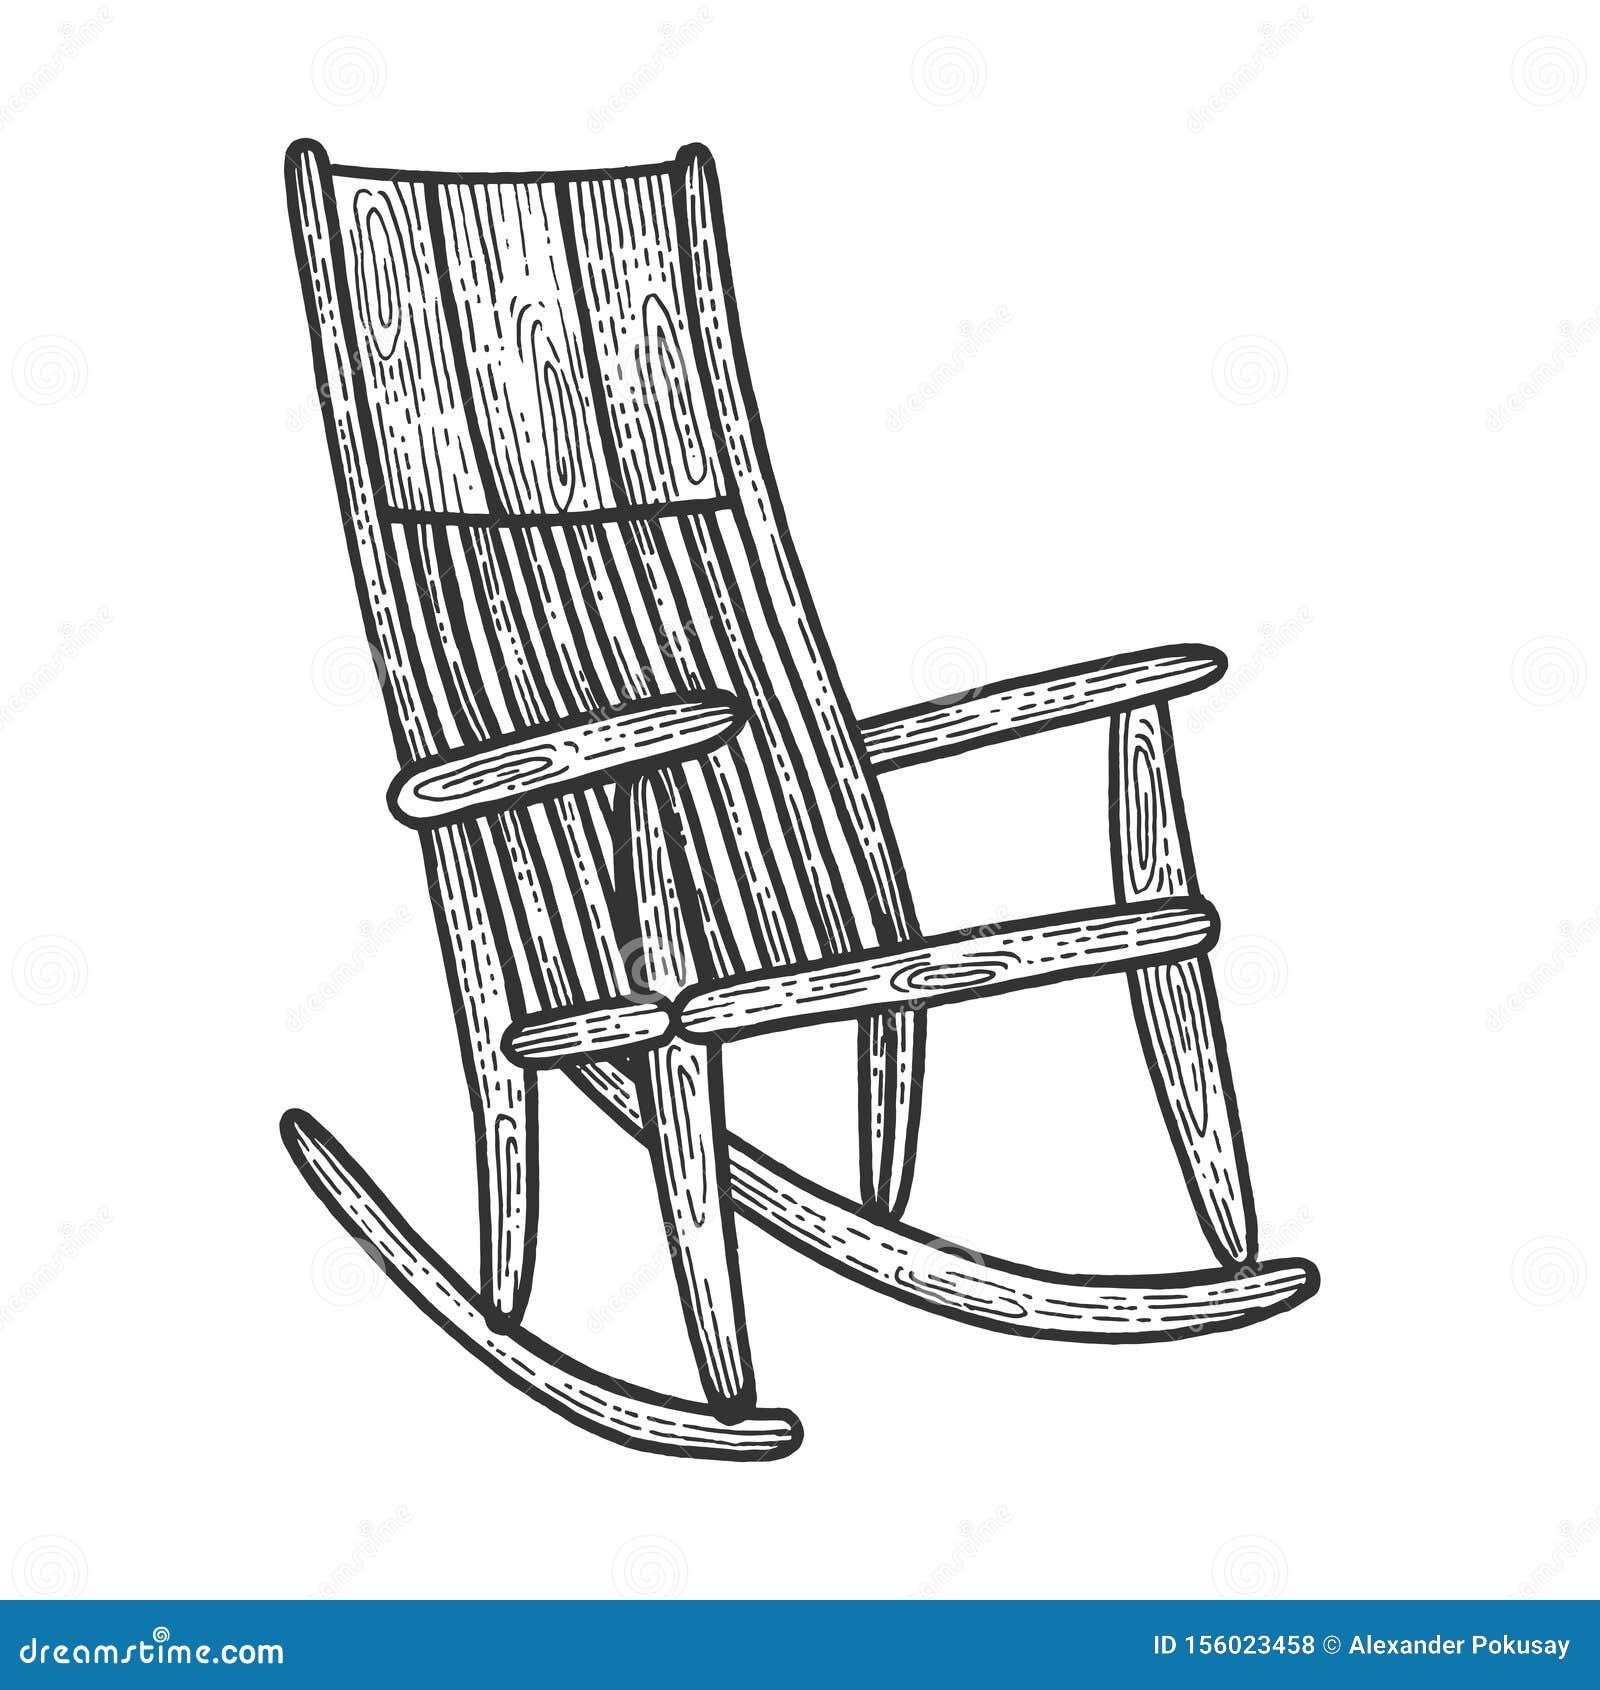 How to easily draw a rocking chair  YouTube